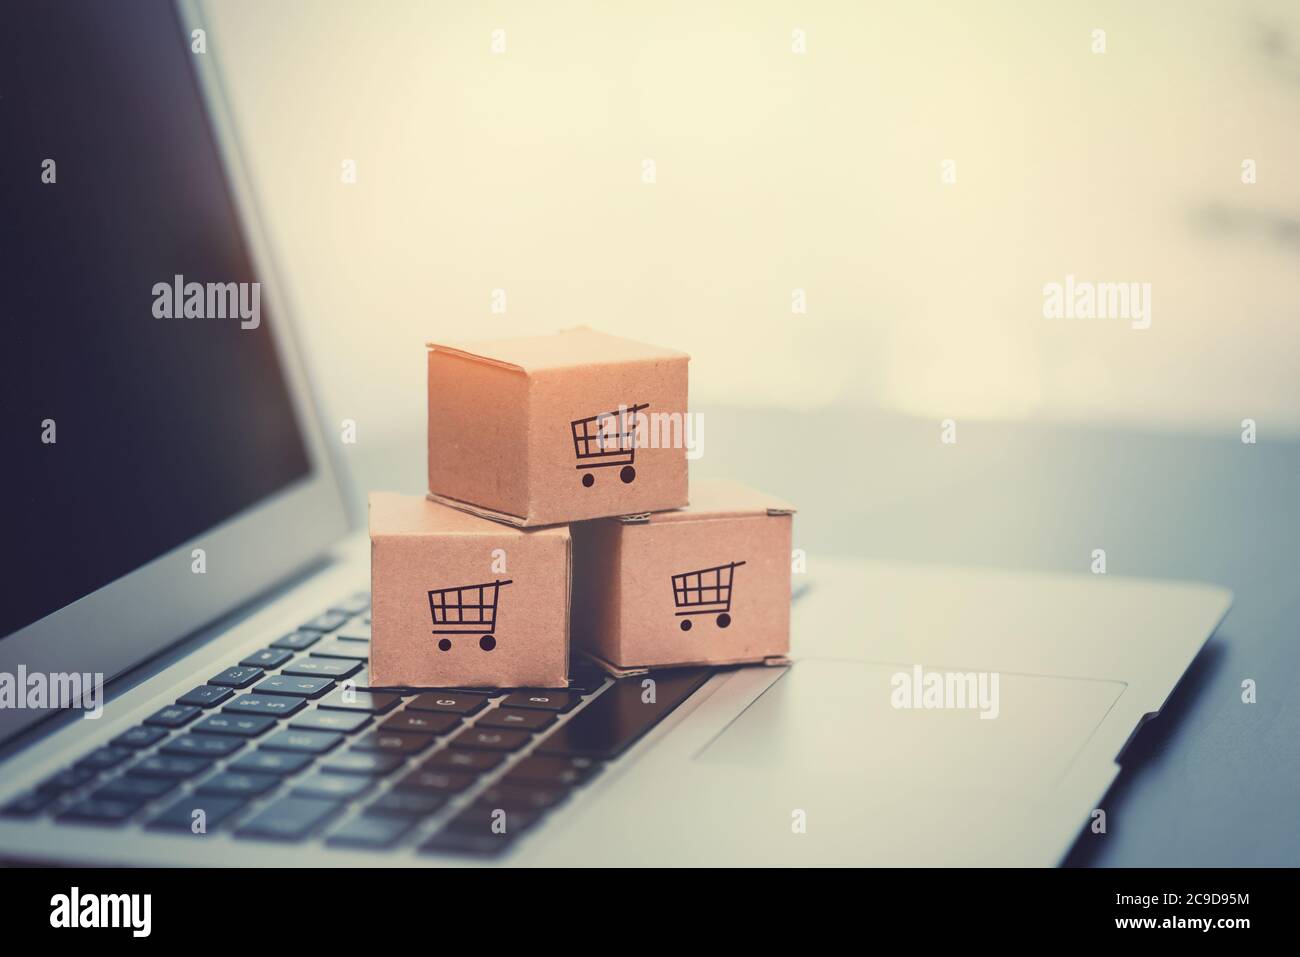 Boxes on laptop keyboard. E-commerce, online shopping concept. Stock Photo